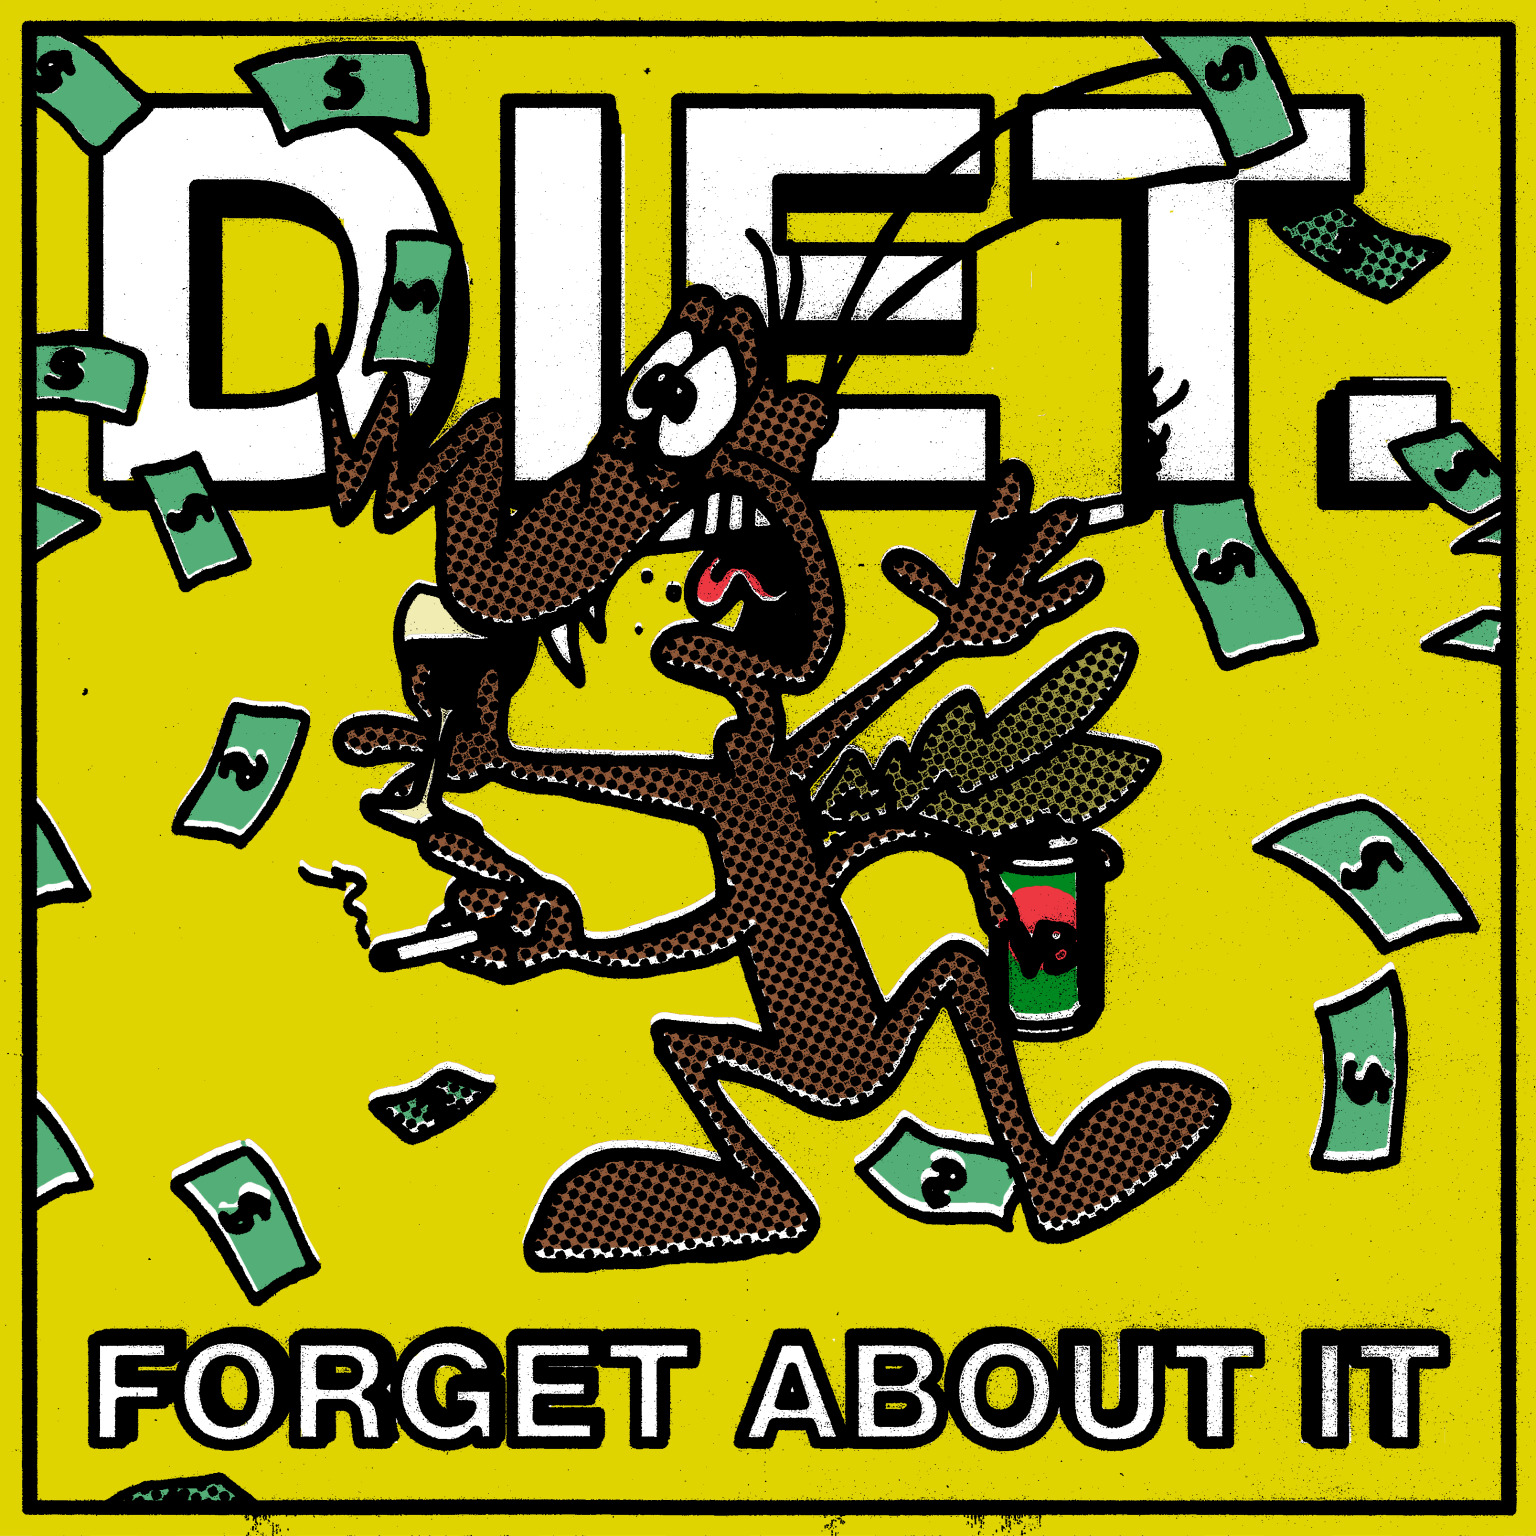 DIET - Forget About It - single cover art.jpeg